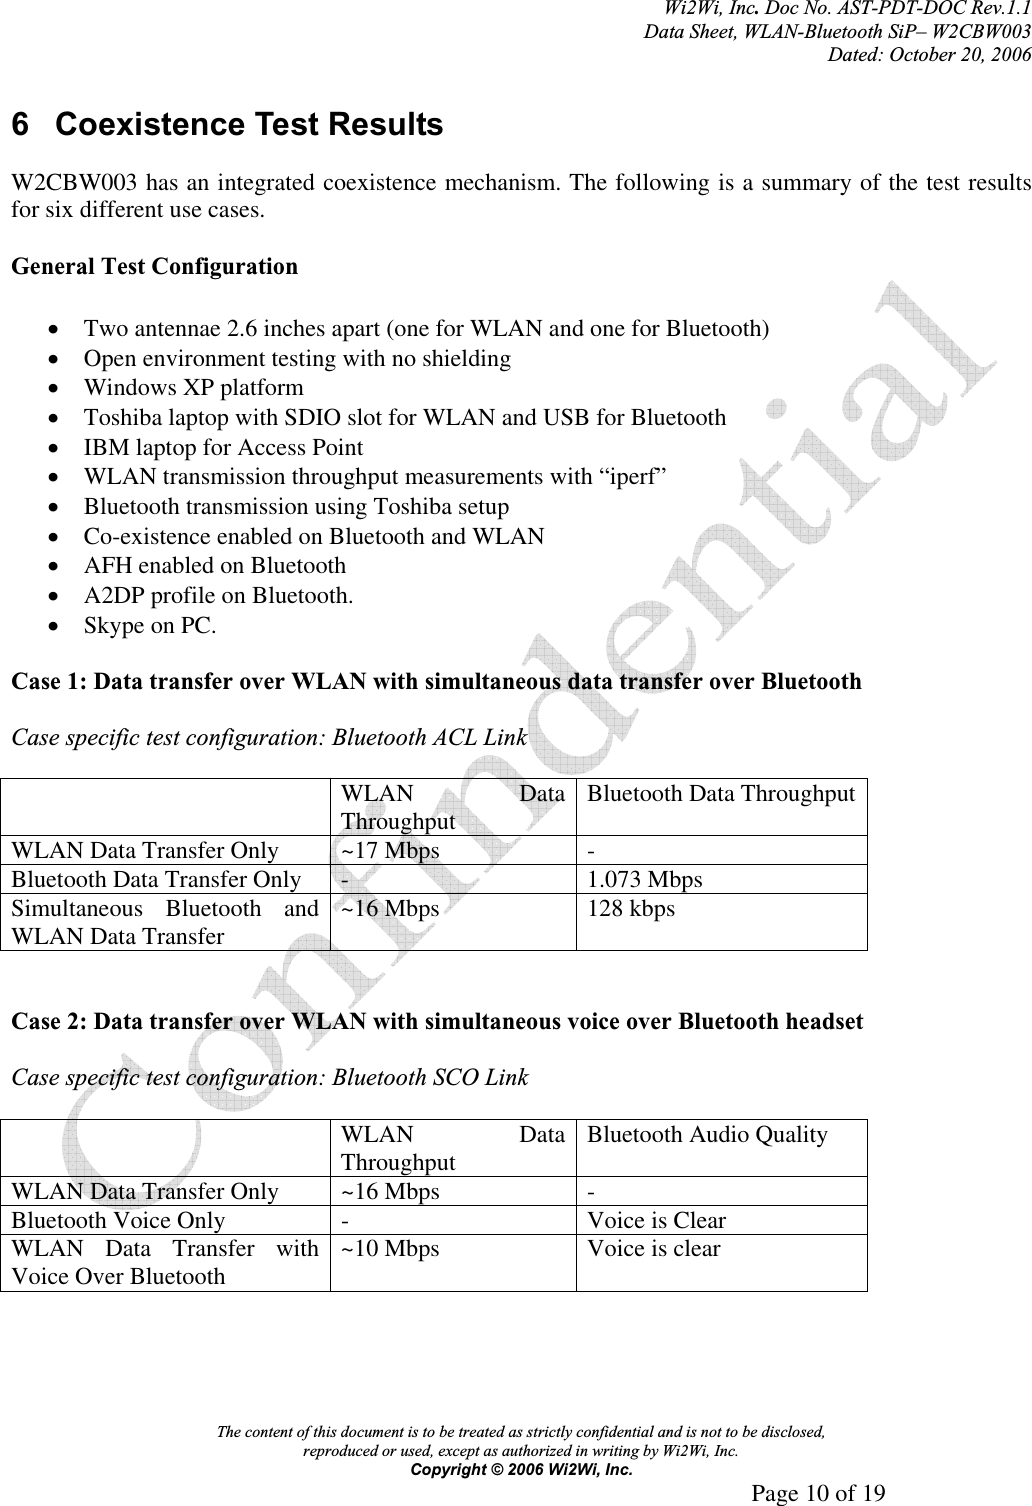 Wi2Wi, Inc.Doc No. AST-PDT-DOC Rev.1.1  Data Sheet, WLAN-Bluetooth SiP– W2CBW003 Dated: October 20, 2006 The content of this document is to be treated as strictly confidential and is not to be disclosed,  reproduced or used, except as authorized in writing by Wi2Wi, Inc.  Copyright © 2006 Wi2Wi, Inc.     Page 10 of 19   6  Coexistence Test Results W2CBW003 has an integrated coexistence mechanism. The following is a summary of the test results for six different use cases. General Test Configuration xTwo antennae 2.6 inches apart (one for WLAN and one for Bluetooth) xOpen environment testing with no shielding xWindows XP platform xToshiba laptop with SDIO slot for WLAN and USB for Bluetooth xIBM laptop for Access Point xWLAN transmission throughput measurements with “iperf” xBluetooth transmission using Toshiba setup xCo-existence enabled on Bluetooth and WLAN xAFH enabled on BluetoothxA2DP profile on Bluetooth. xSkype on PC. Case 1: Data transfer over WLAN with simultaneous data transfer over Bluetooth Case specific test configuration: Bluetooth ACL Link  WLAN Data Throughput Bluetooth Data Throughput WLAN Data Transfer Only  ~17 Mbps  - Bluetooth Data Transfer Only  -  1.073 Mbps Simultaneous Bluetooth and WLAN Data Transfer  ~16 Mbps  128 kbps Case 2: Data transfer over WLAN with simultaneous voice over Bluetooth headset Case specific test configuration: Bluetooth SCO Link  WLAN Data Throughput Bluetooth Audio Quality WLAN Data Transfer Only  ~16 Mbps  - Bluetooth Voice Only  -  Voice is Clear WLAN Data Transfer with Voice Over Bluetooth  ~10 Mbps  Voice is clear 